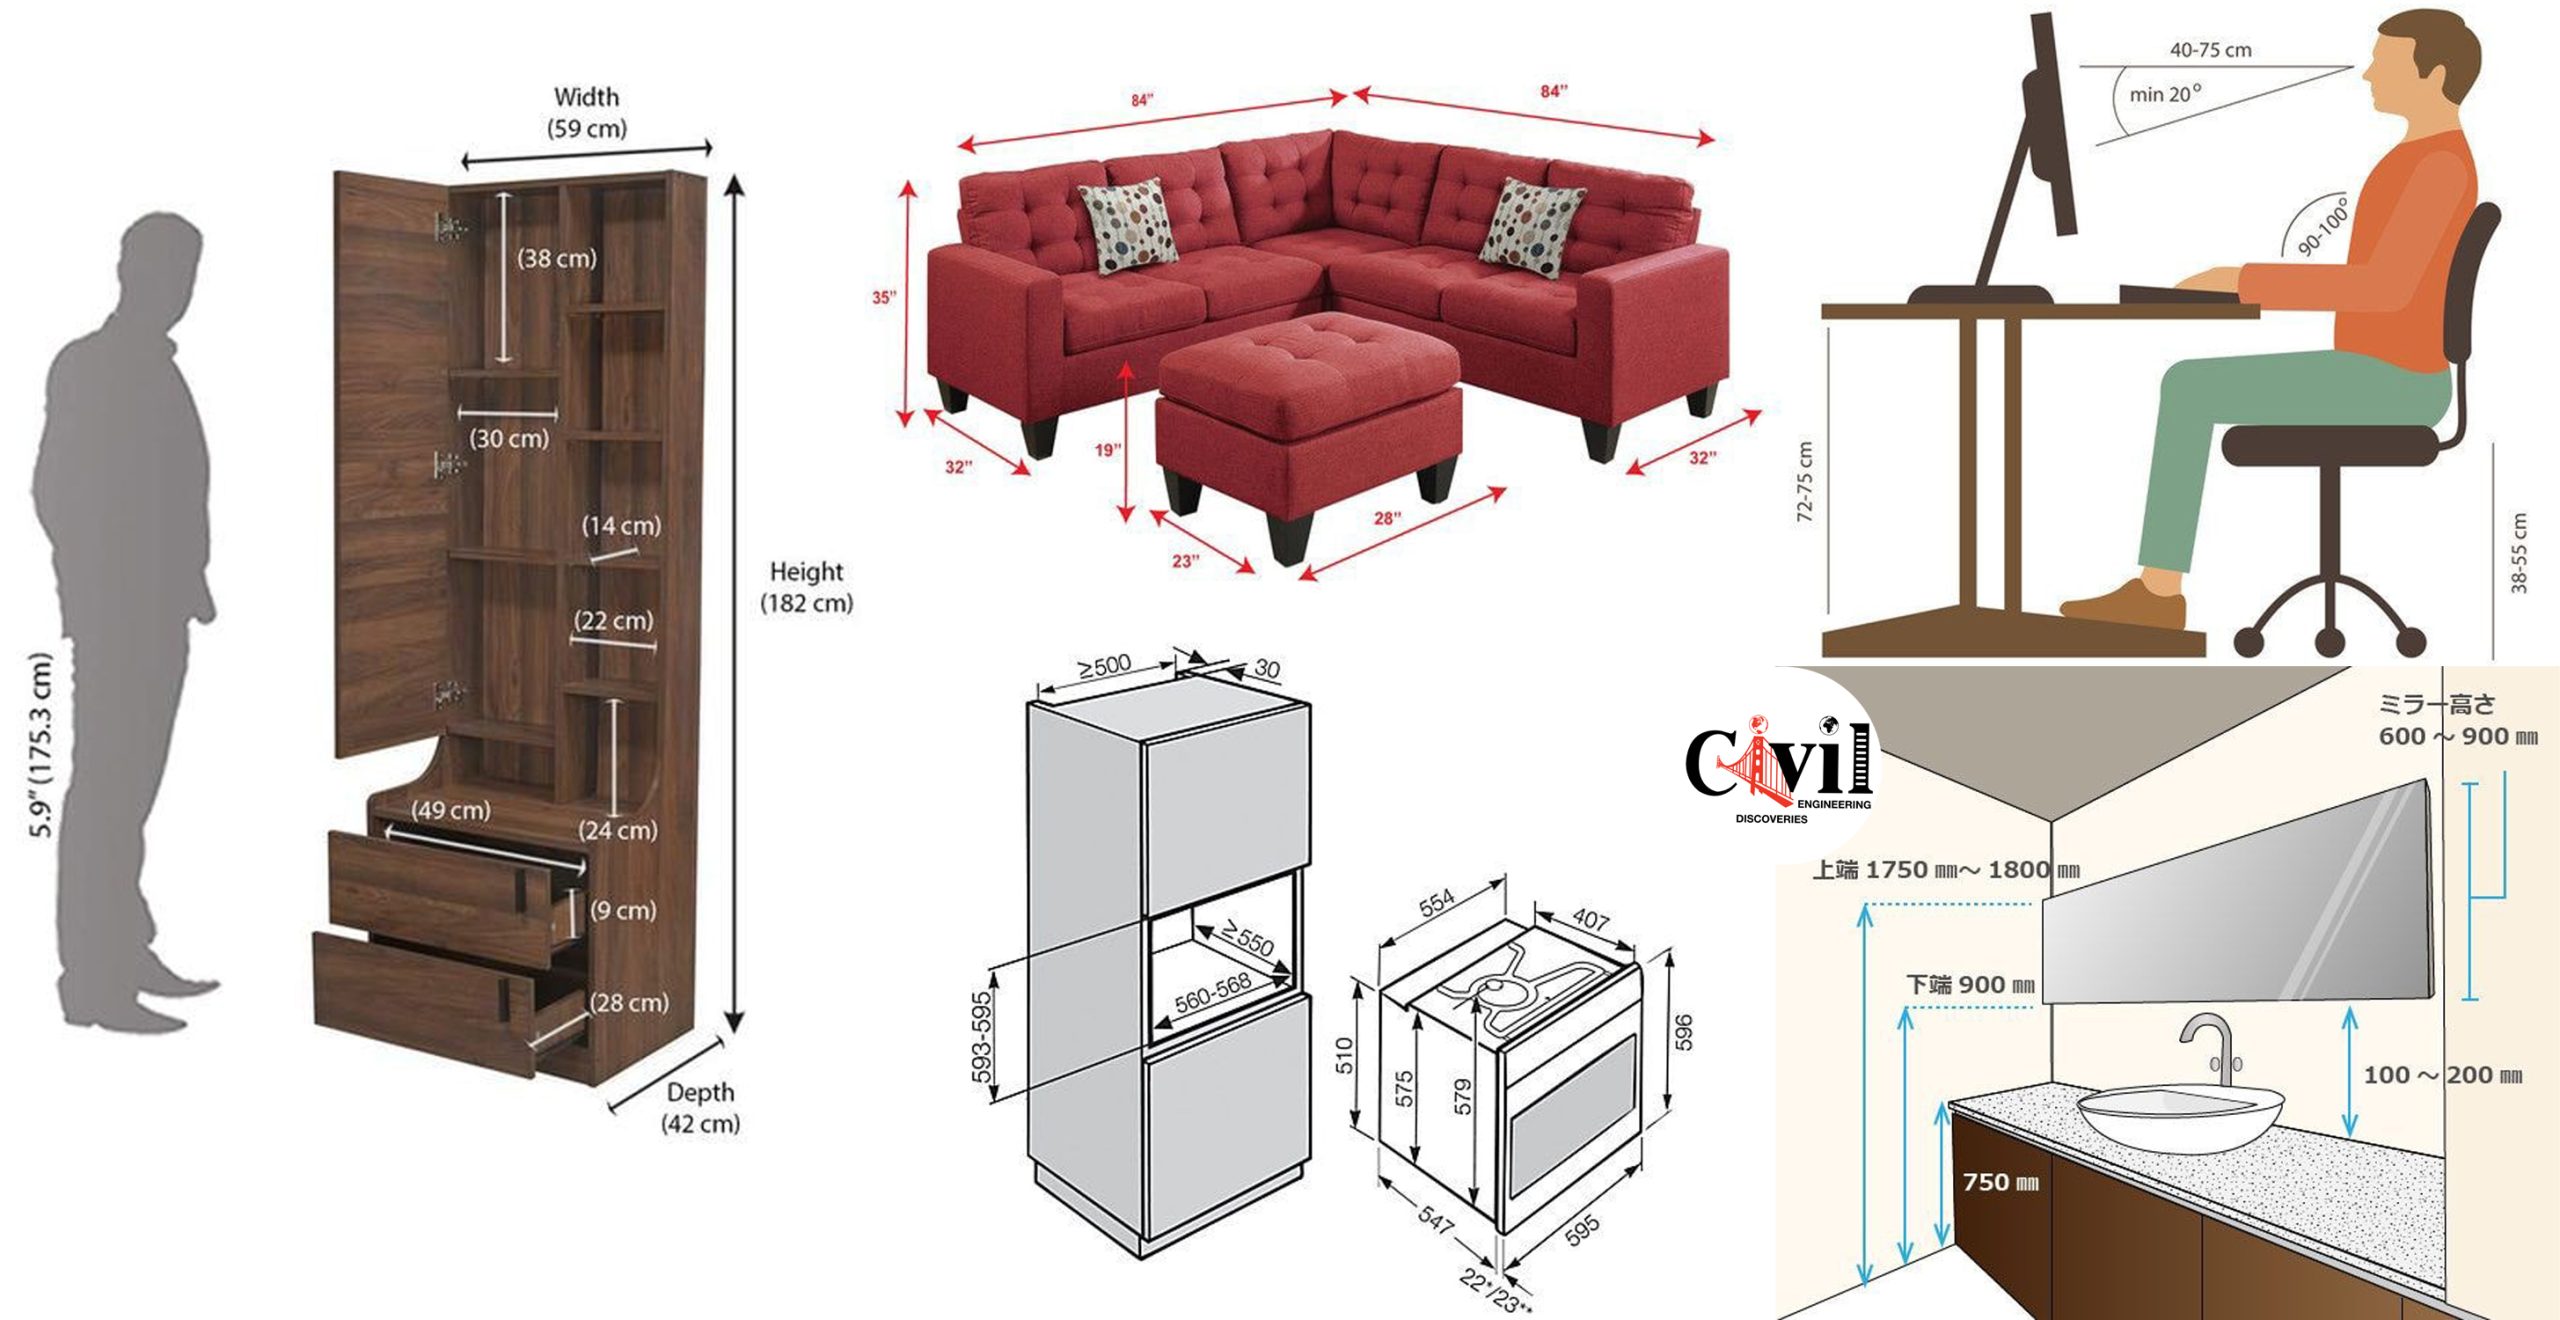 Standard Sizes And Dimensions Of Home Furniture  Scaled 